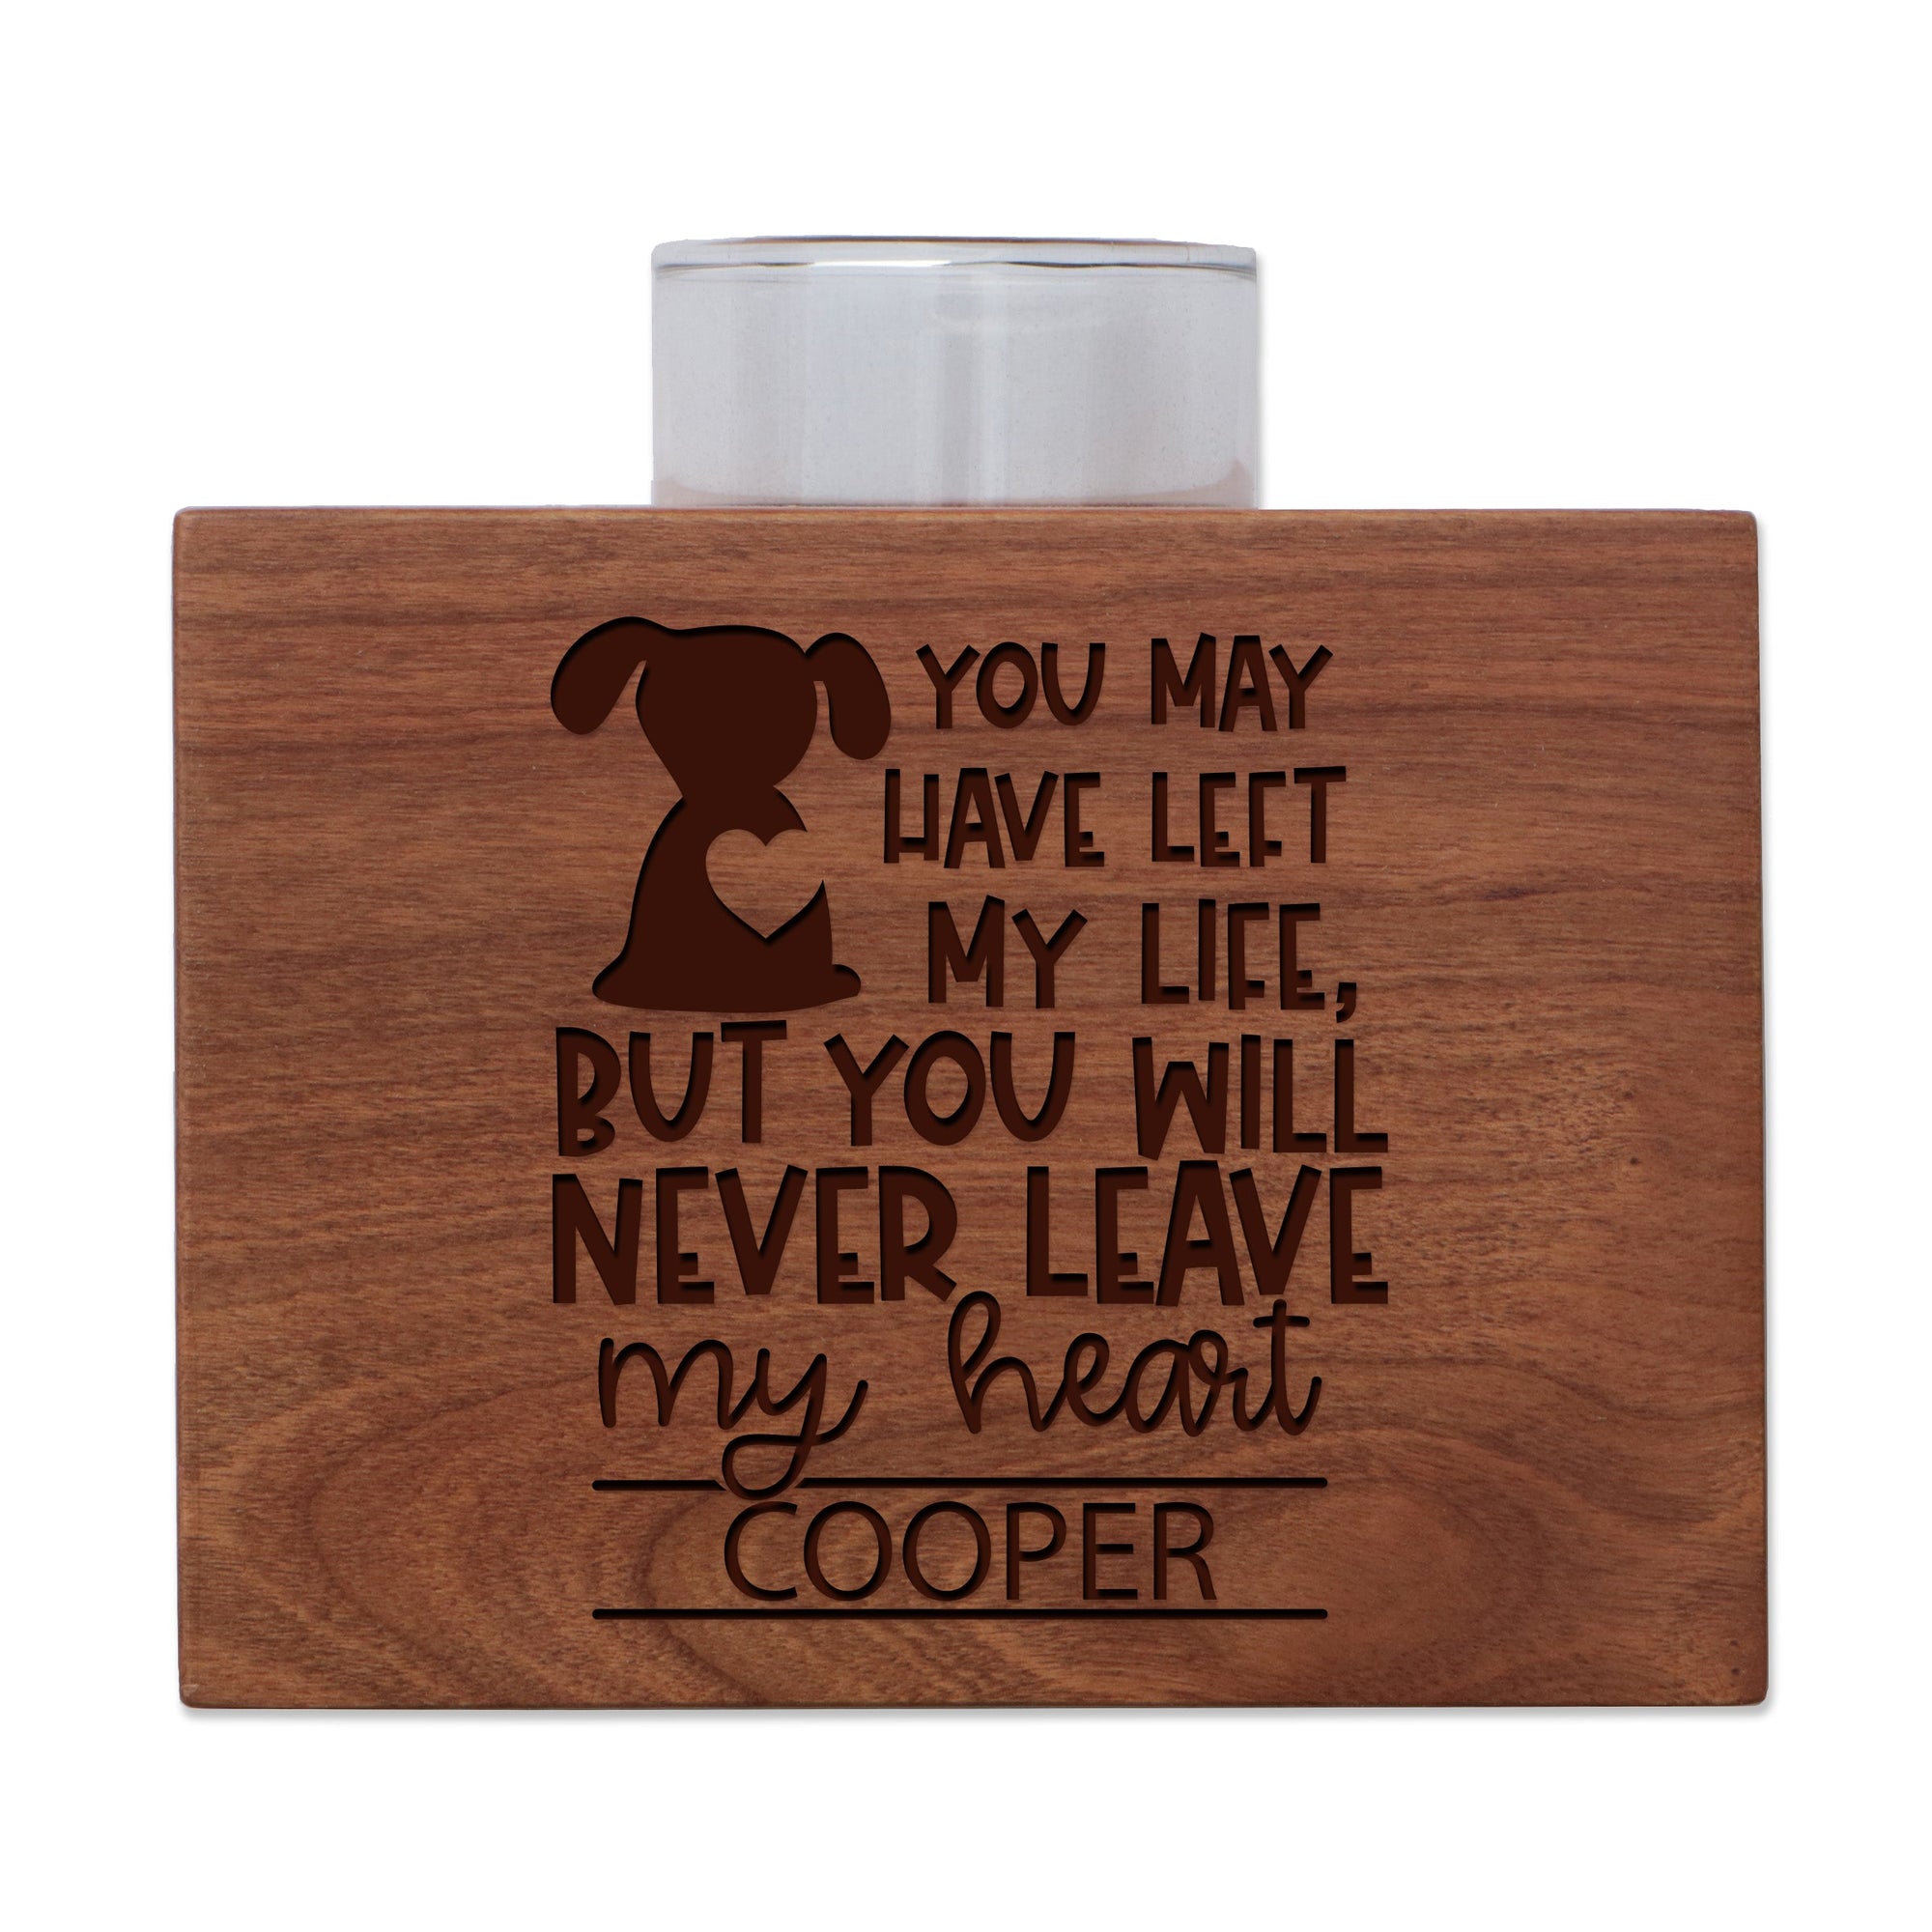 Pet Memorial Single Candle Holder - You May Have Left My Life (Dog)